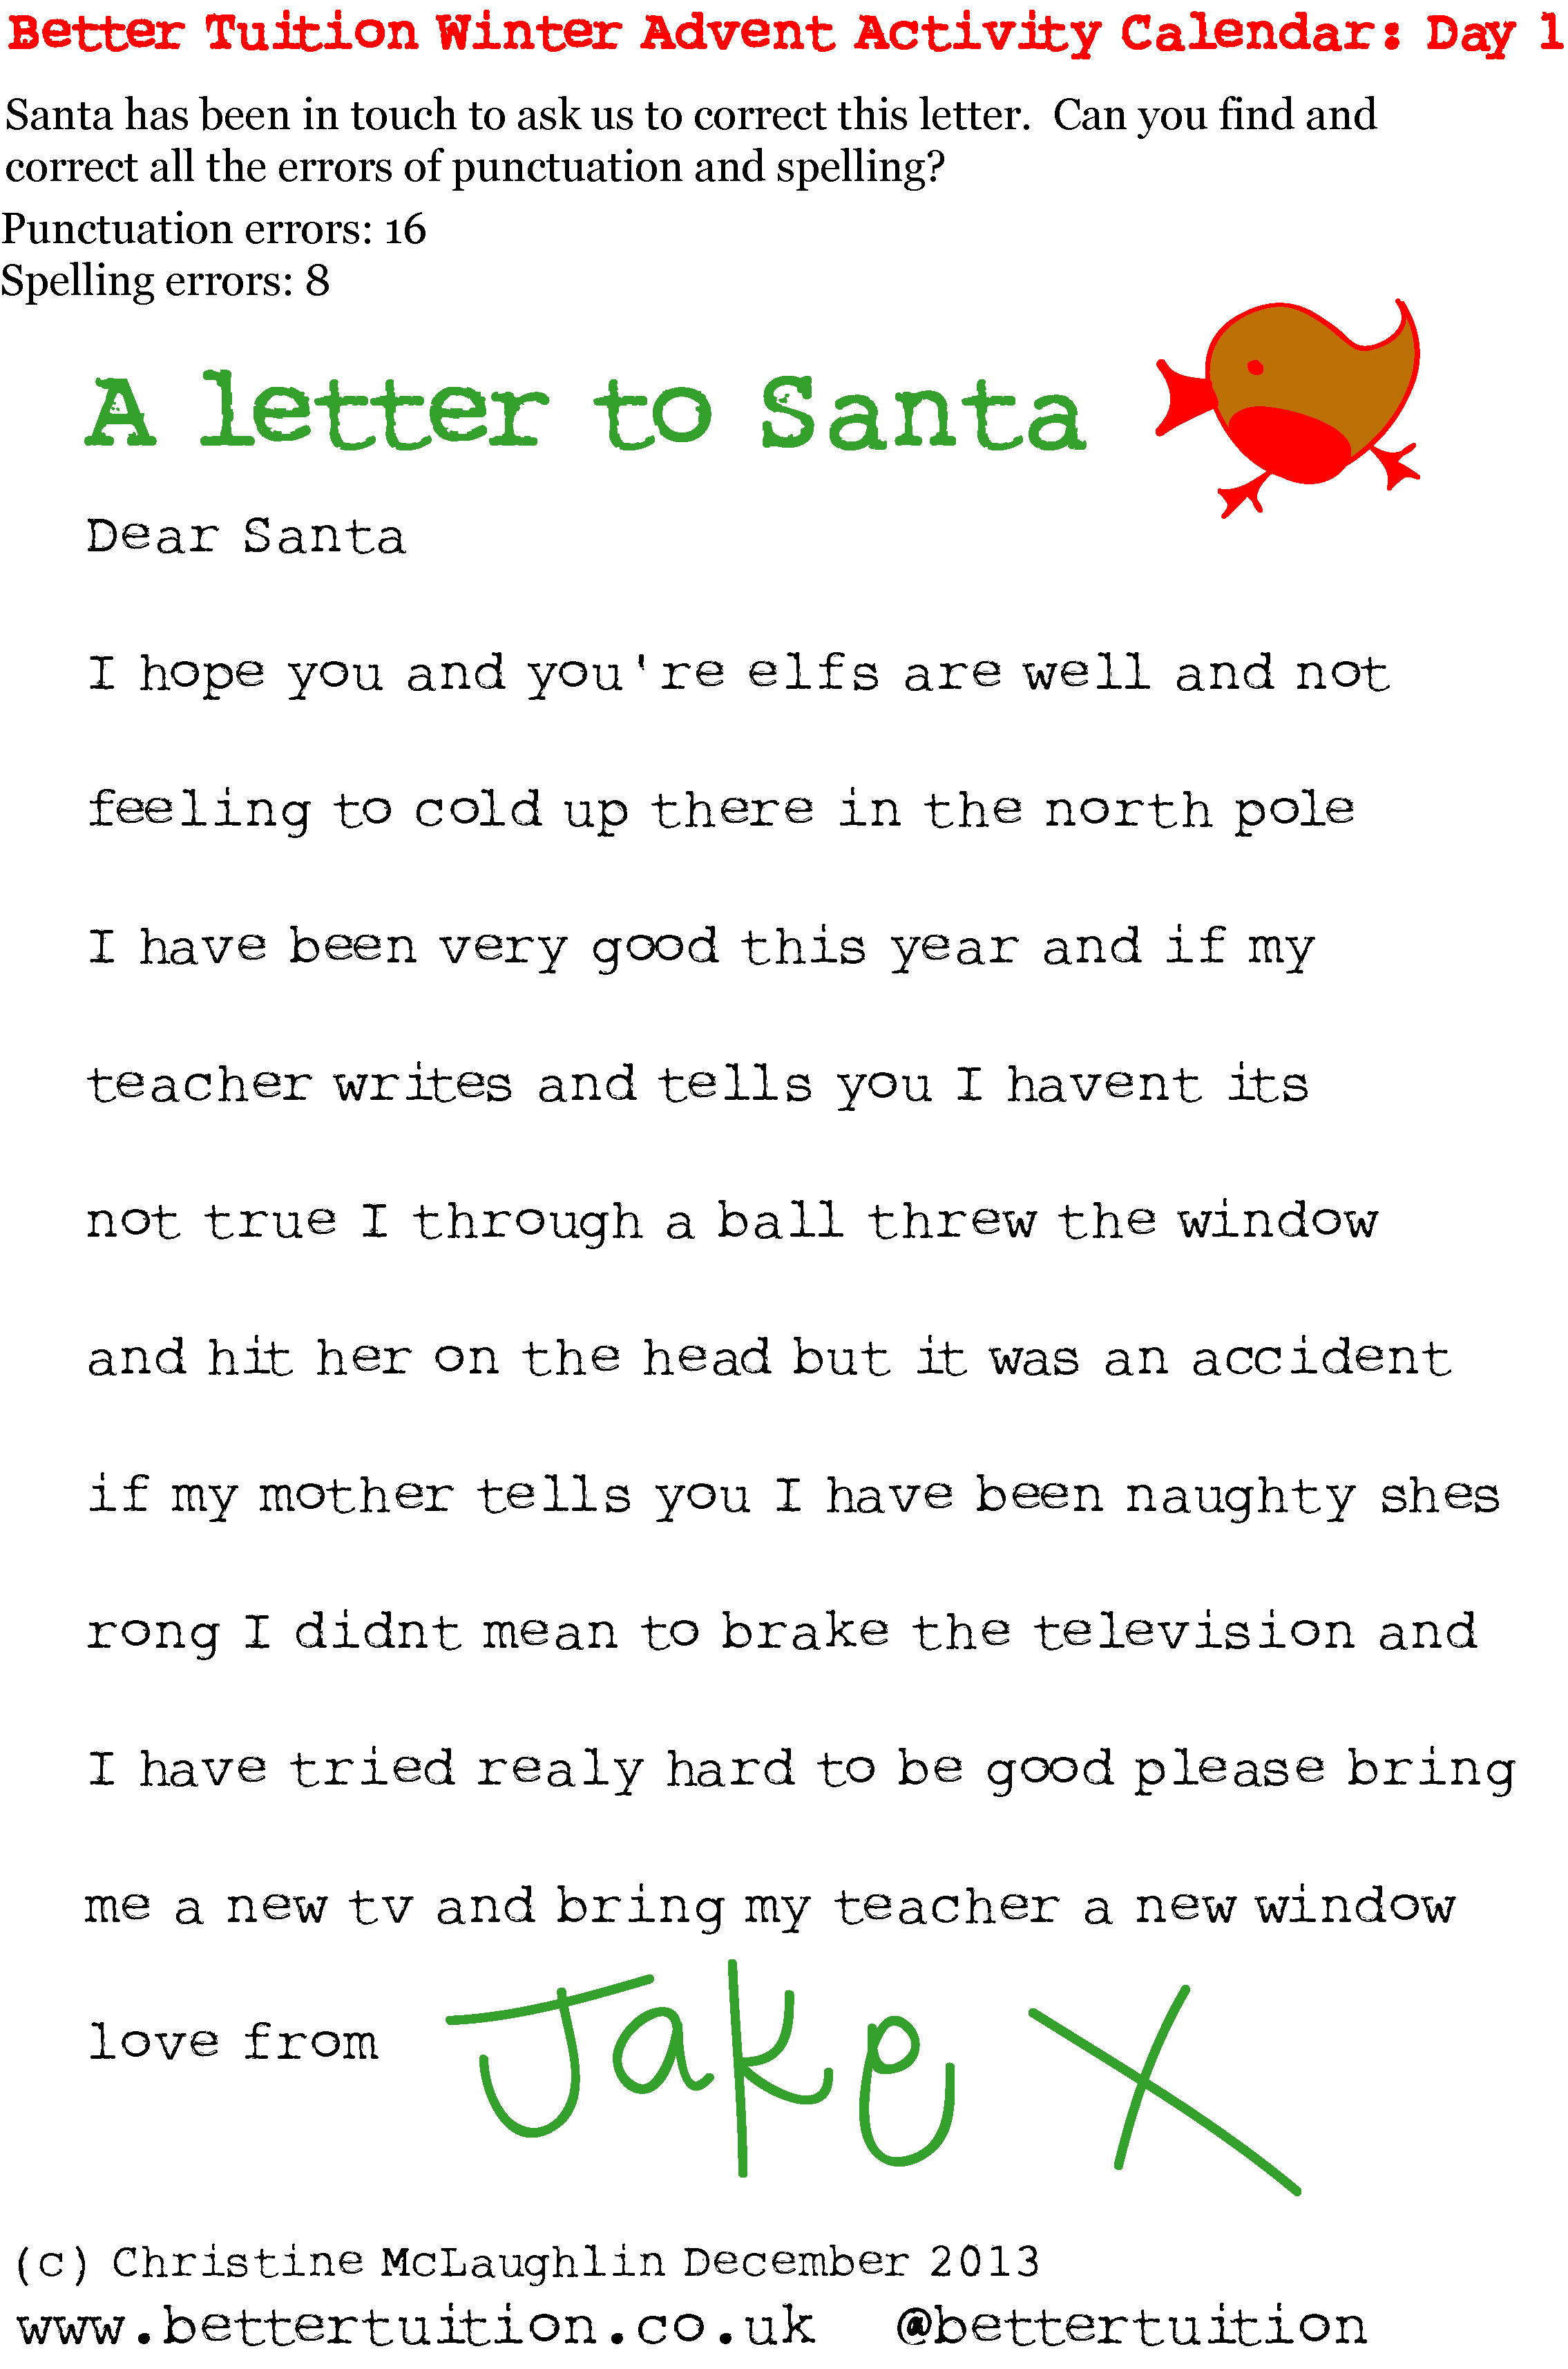 december-1st-a-letter-to-santa-better-tuition